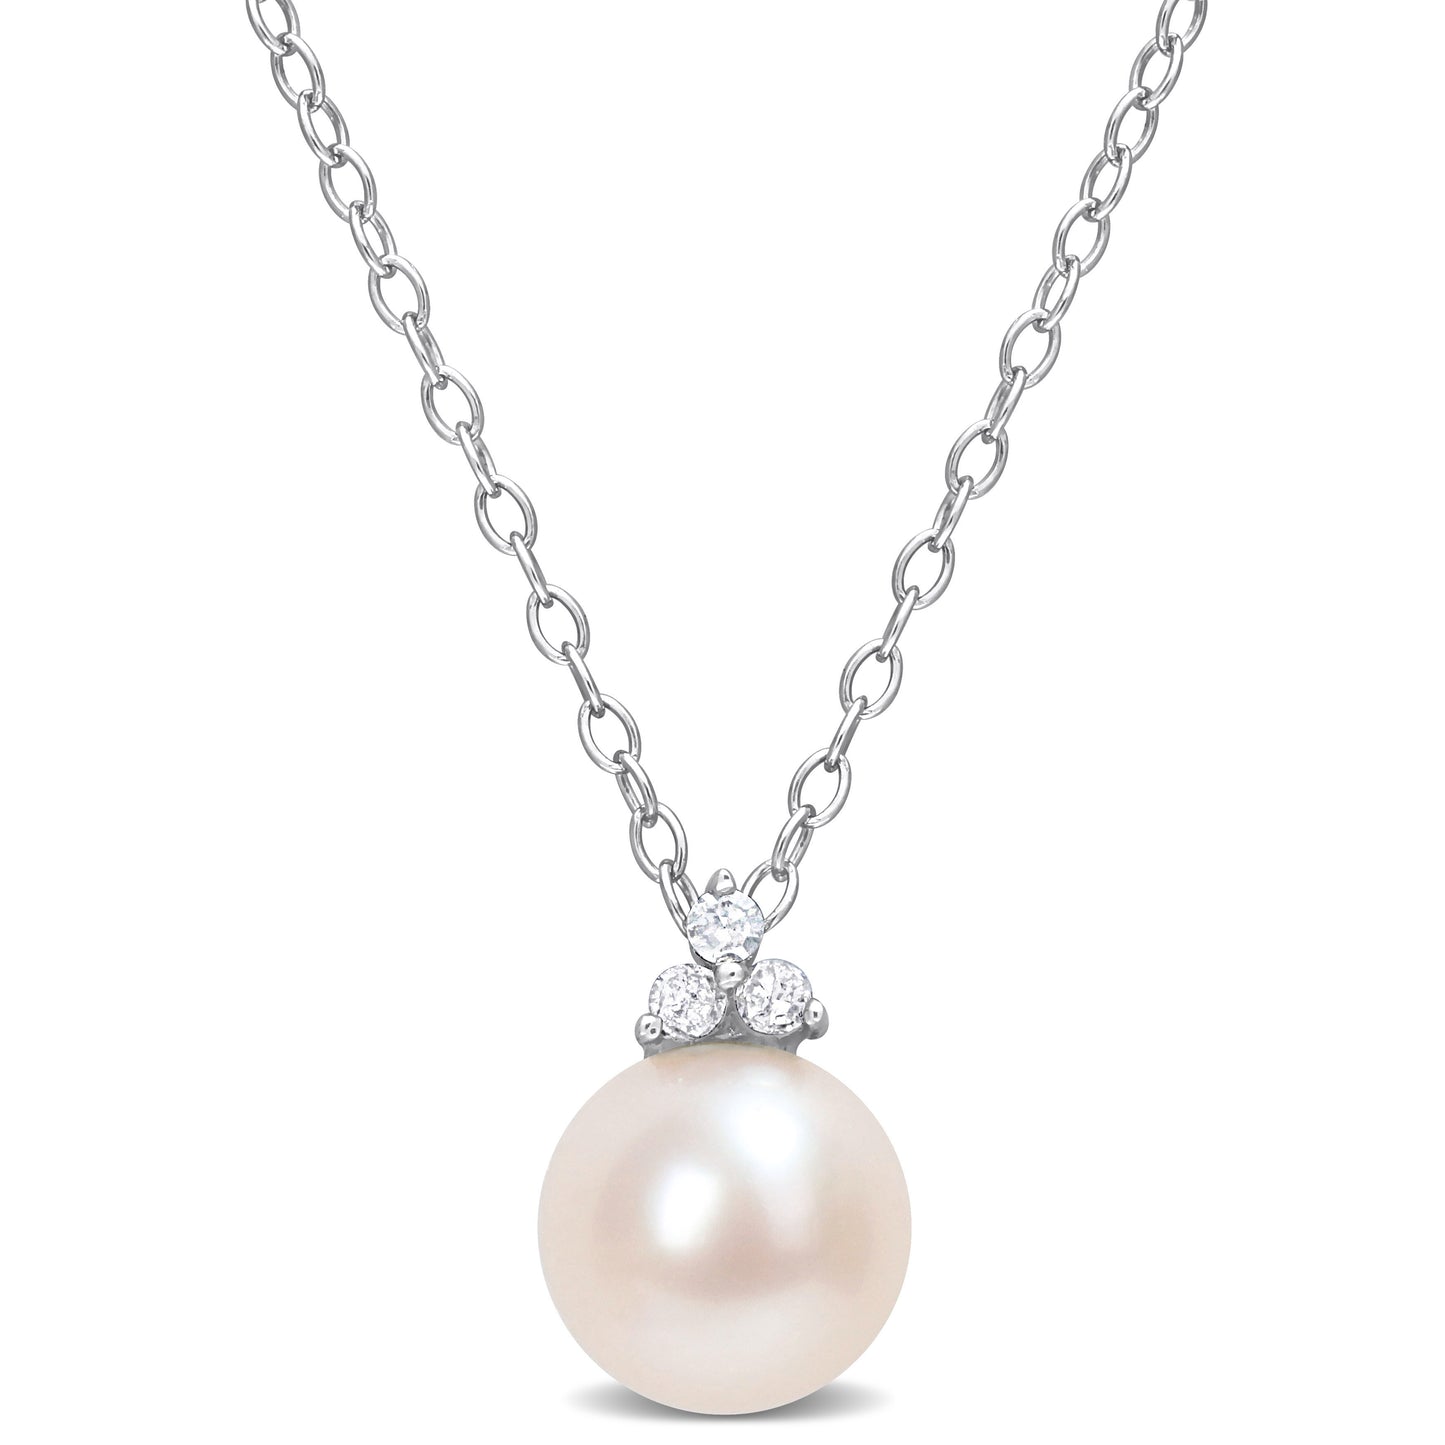 Pearl & Diamond Necklace in Sterling Silver